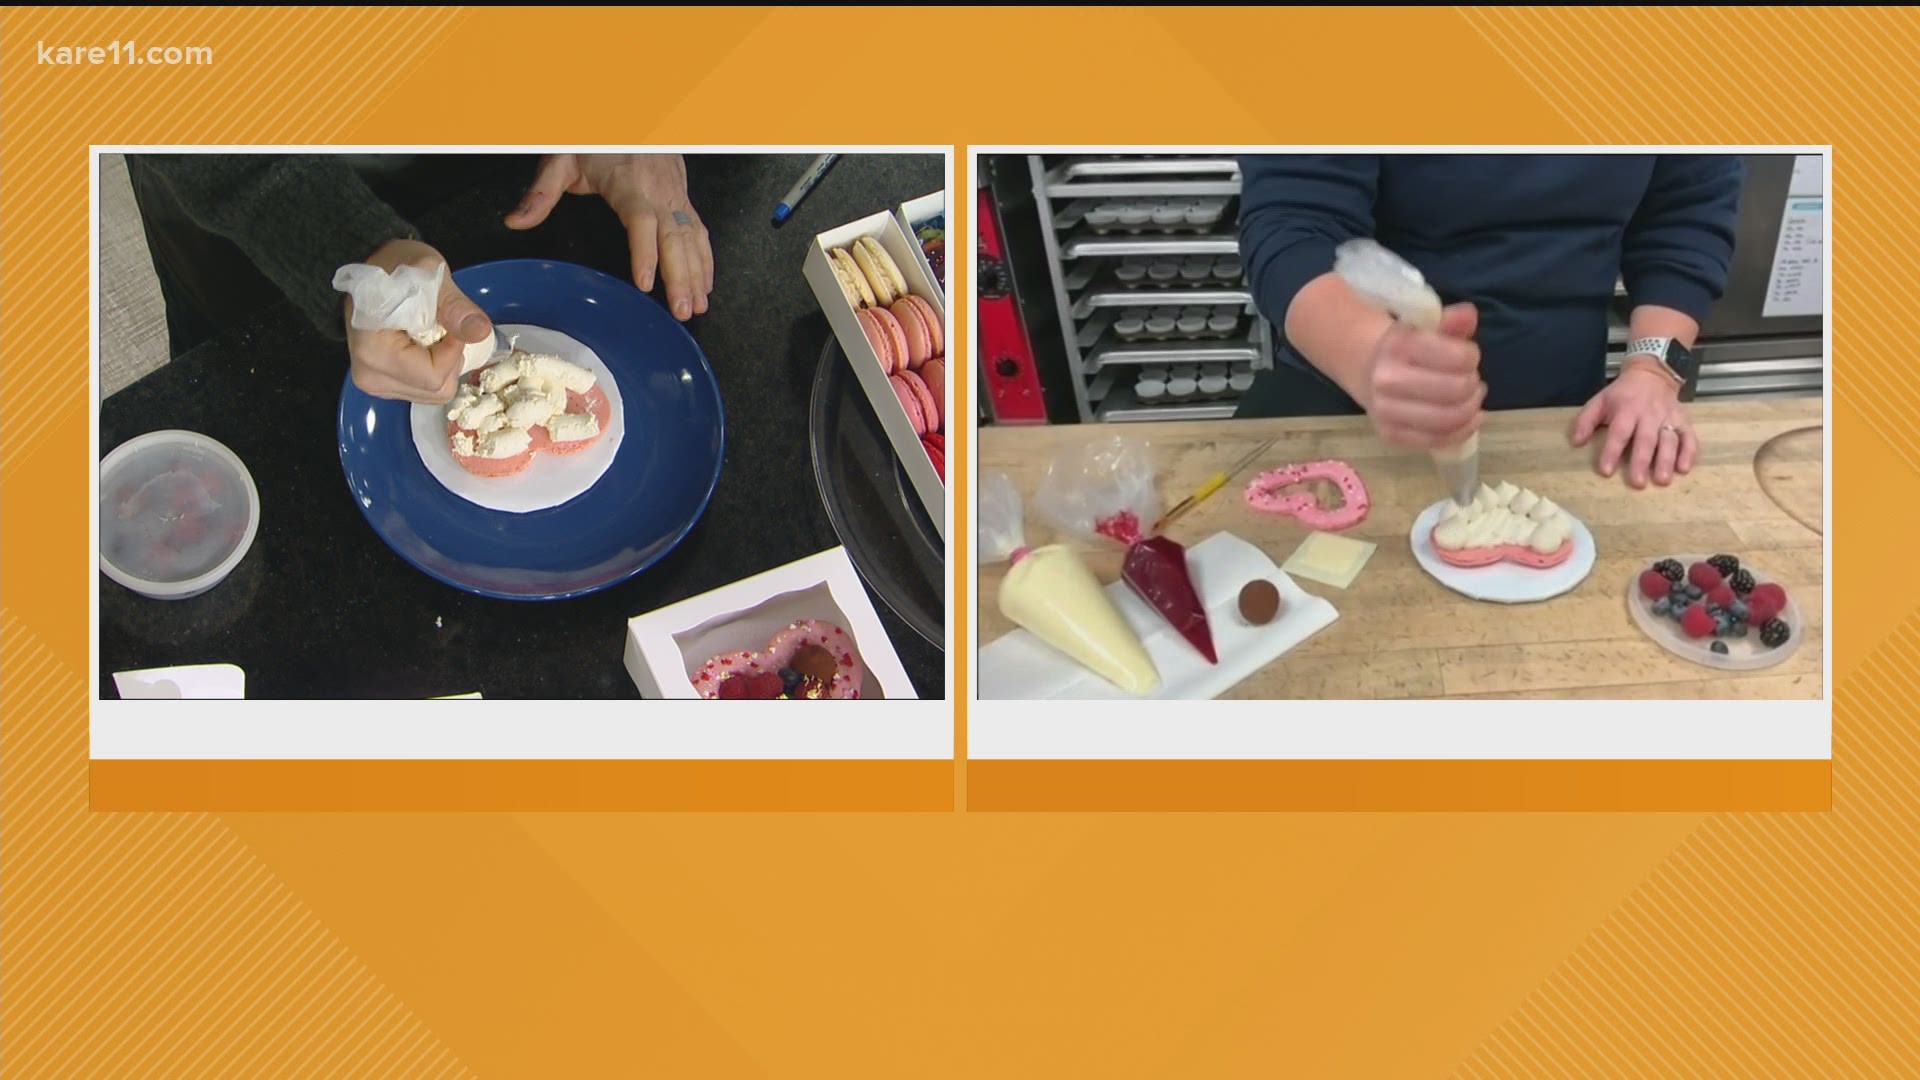 The owner of Amy’s Cupcake Shoppe shows off some sweet Valentine's Day creations.